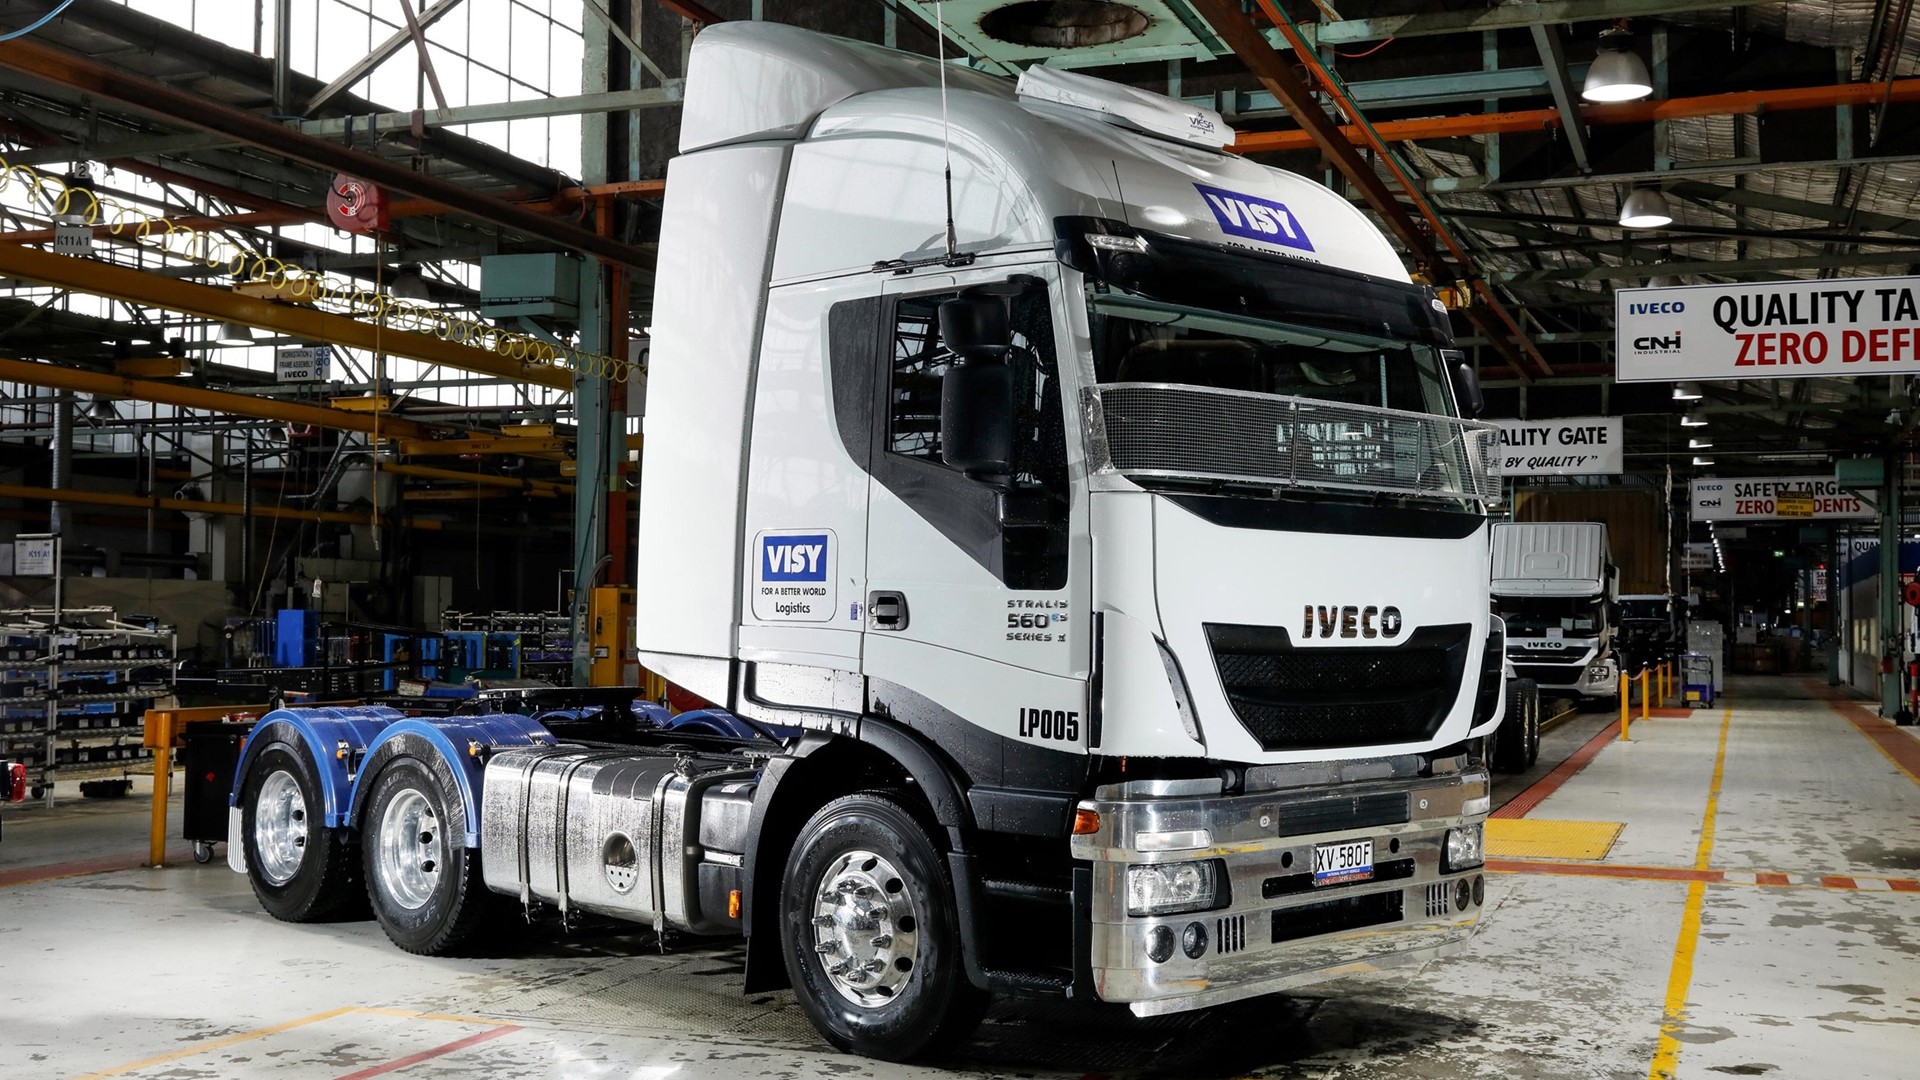 Visy and IVECO strengthen relationship during COVID